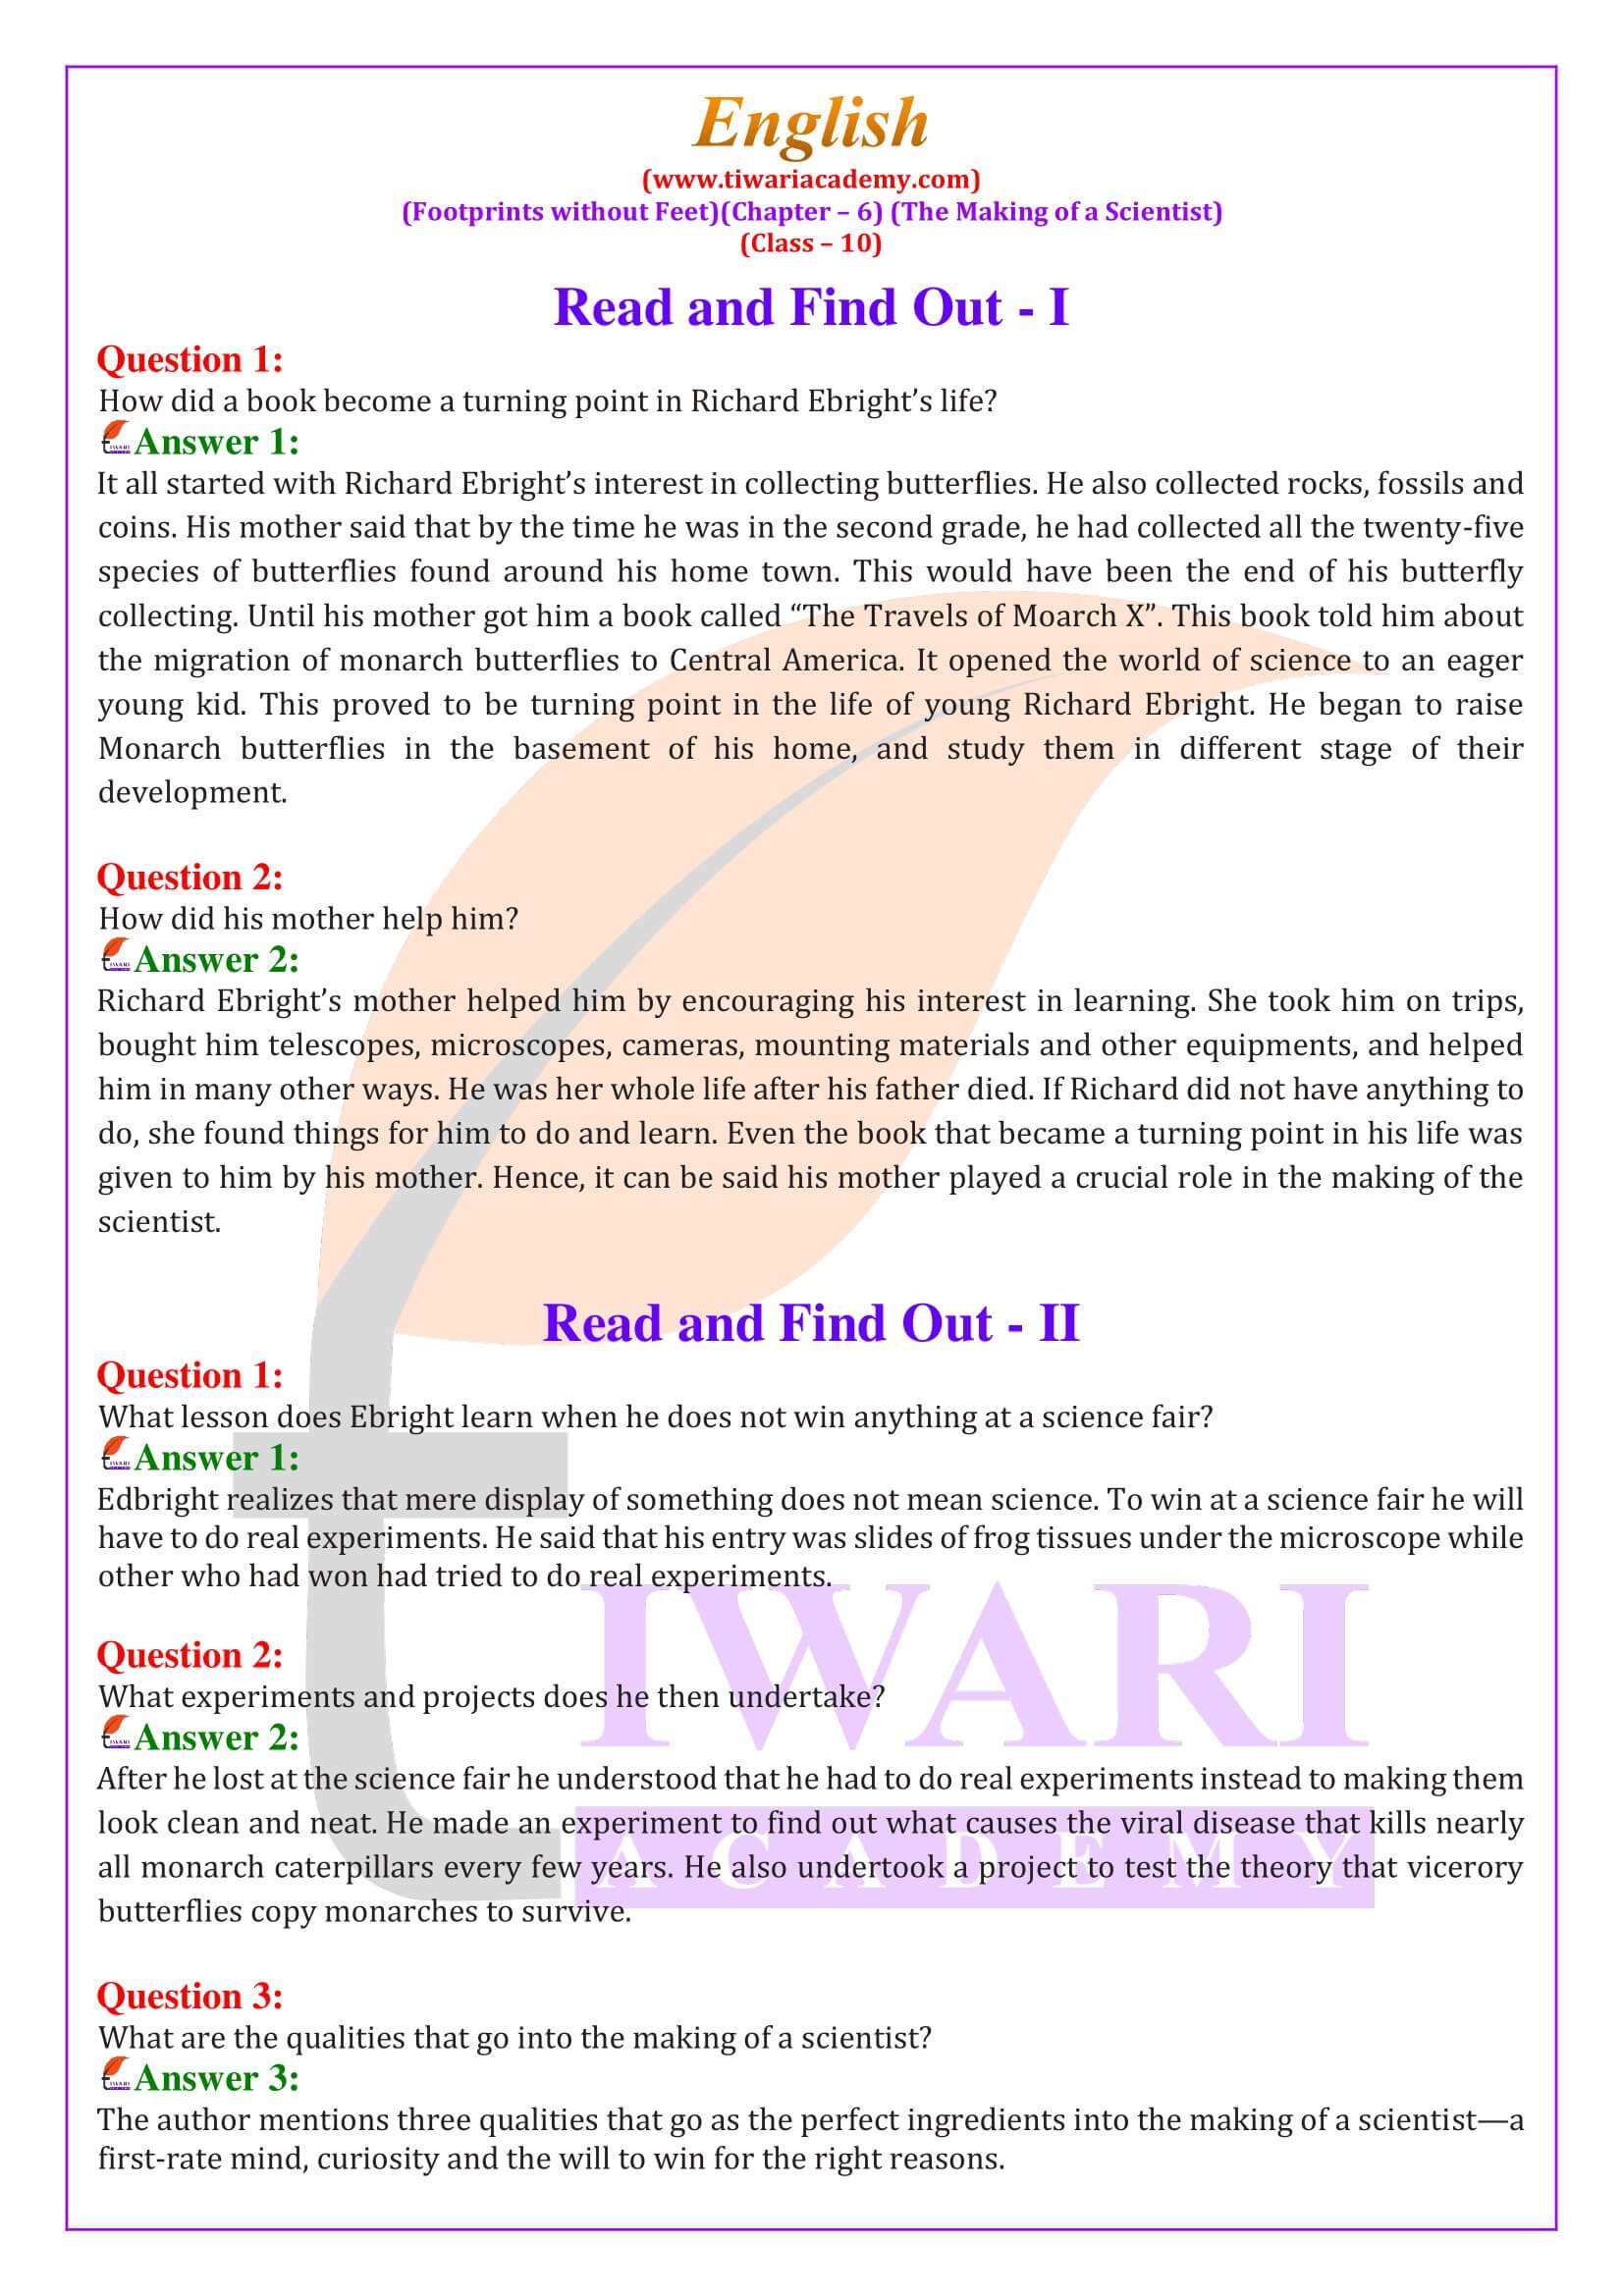 NCERT Solutions for Class 10 English Chapter 6